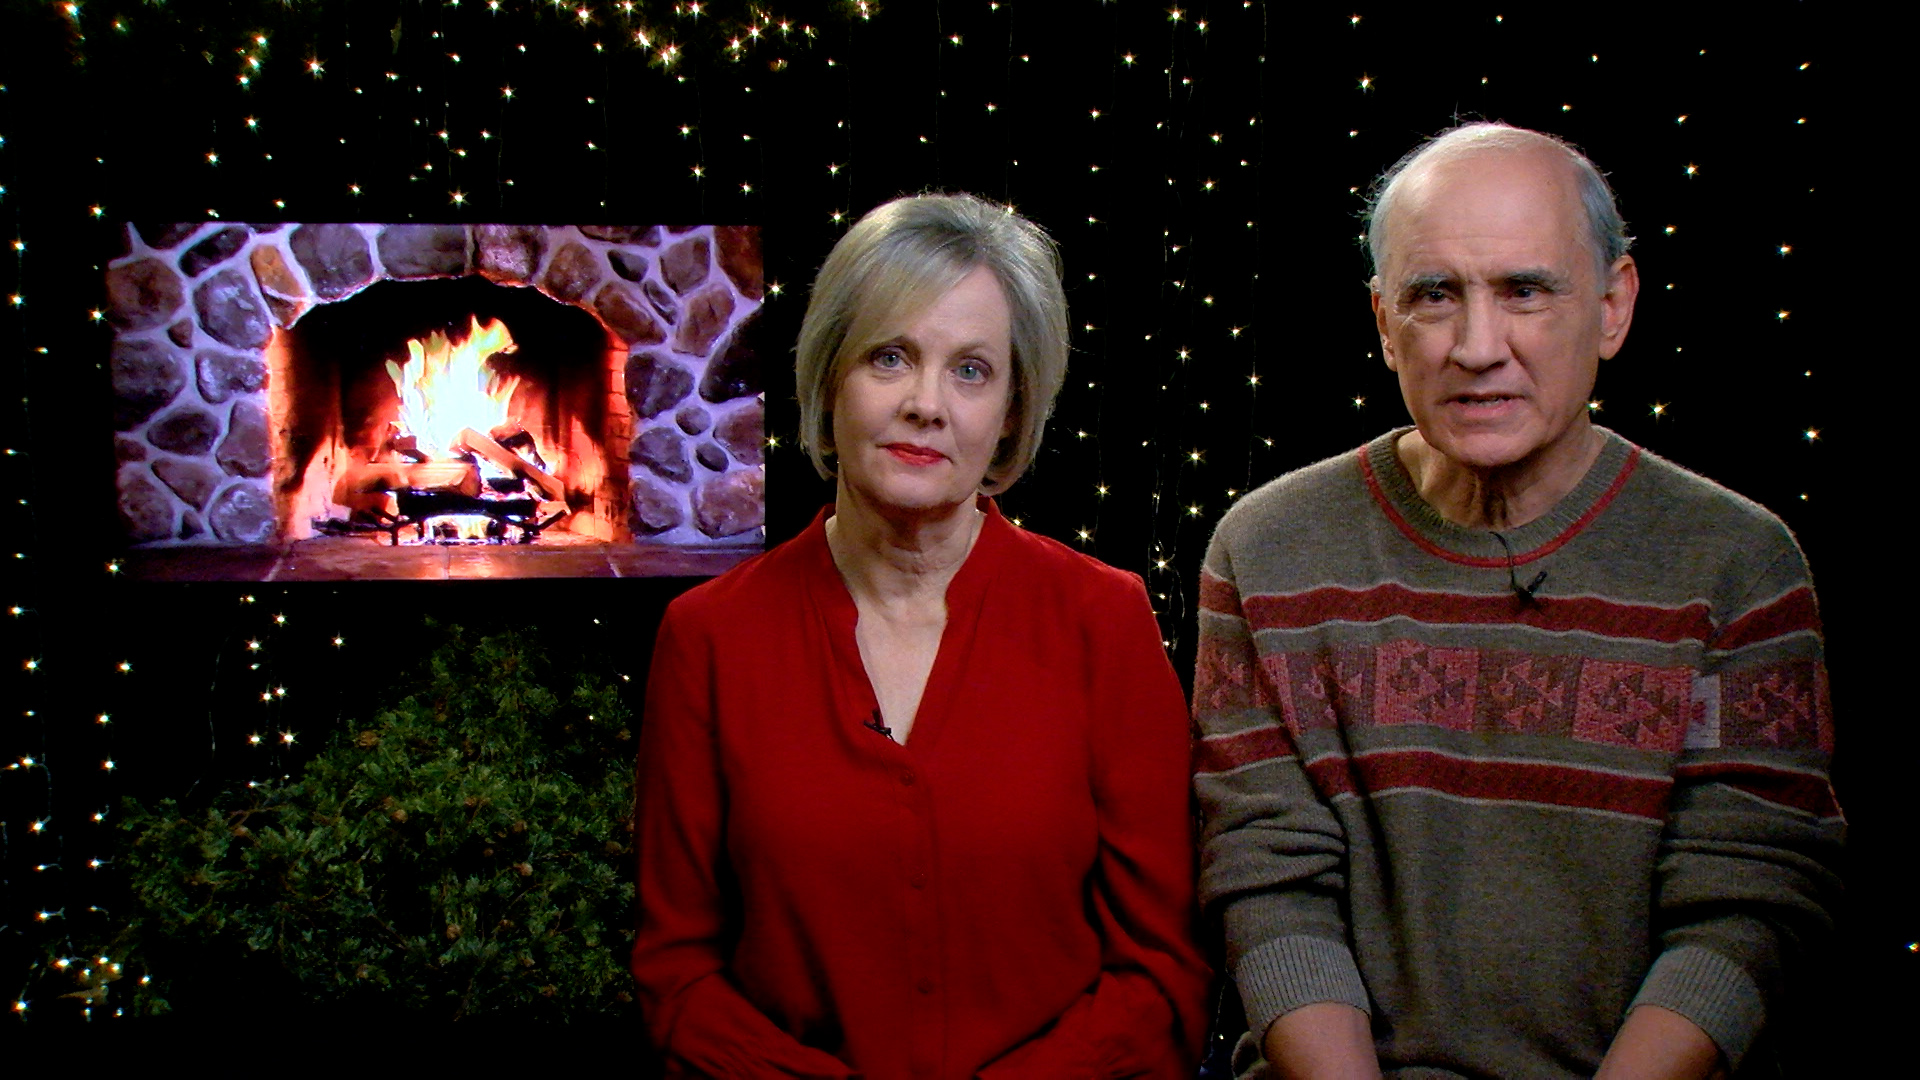 FFRF Co-Presidents in front of a fireplace